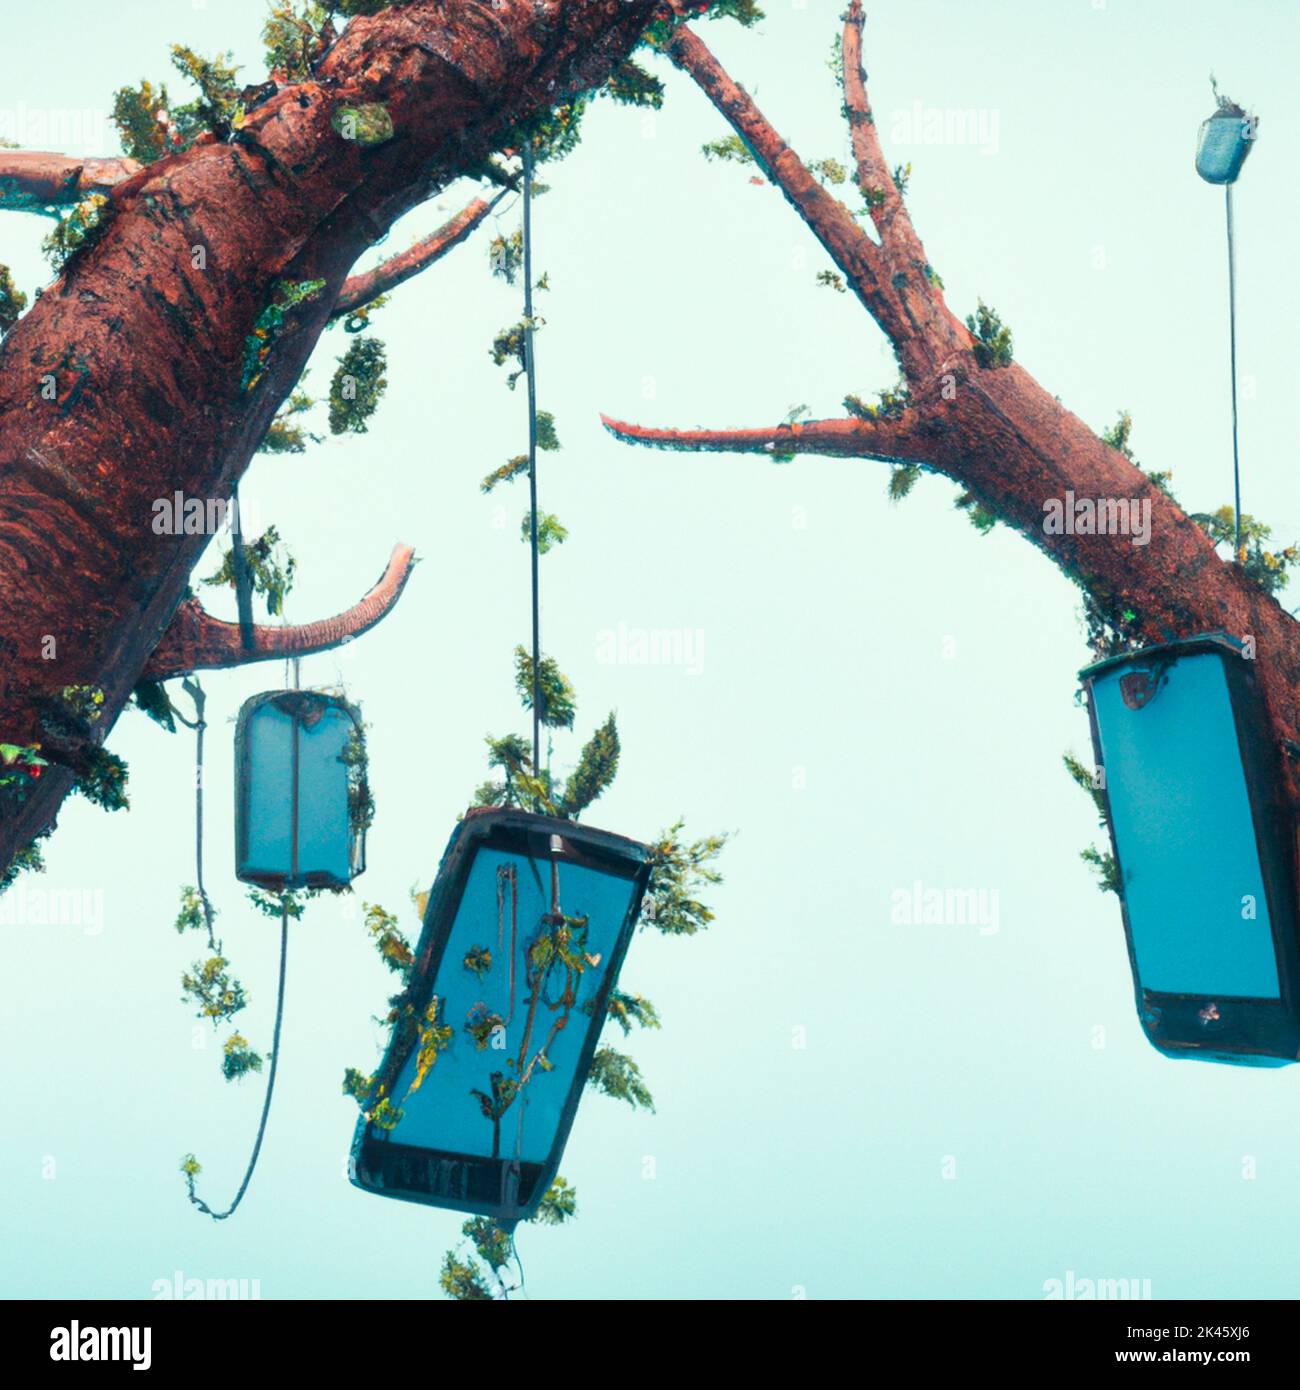 France, Paris on 26/09/2022. Digital illustration of a smartphone growing in a tree evoking the link between nature and technology. Image created usin Stock Photo